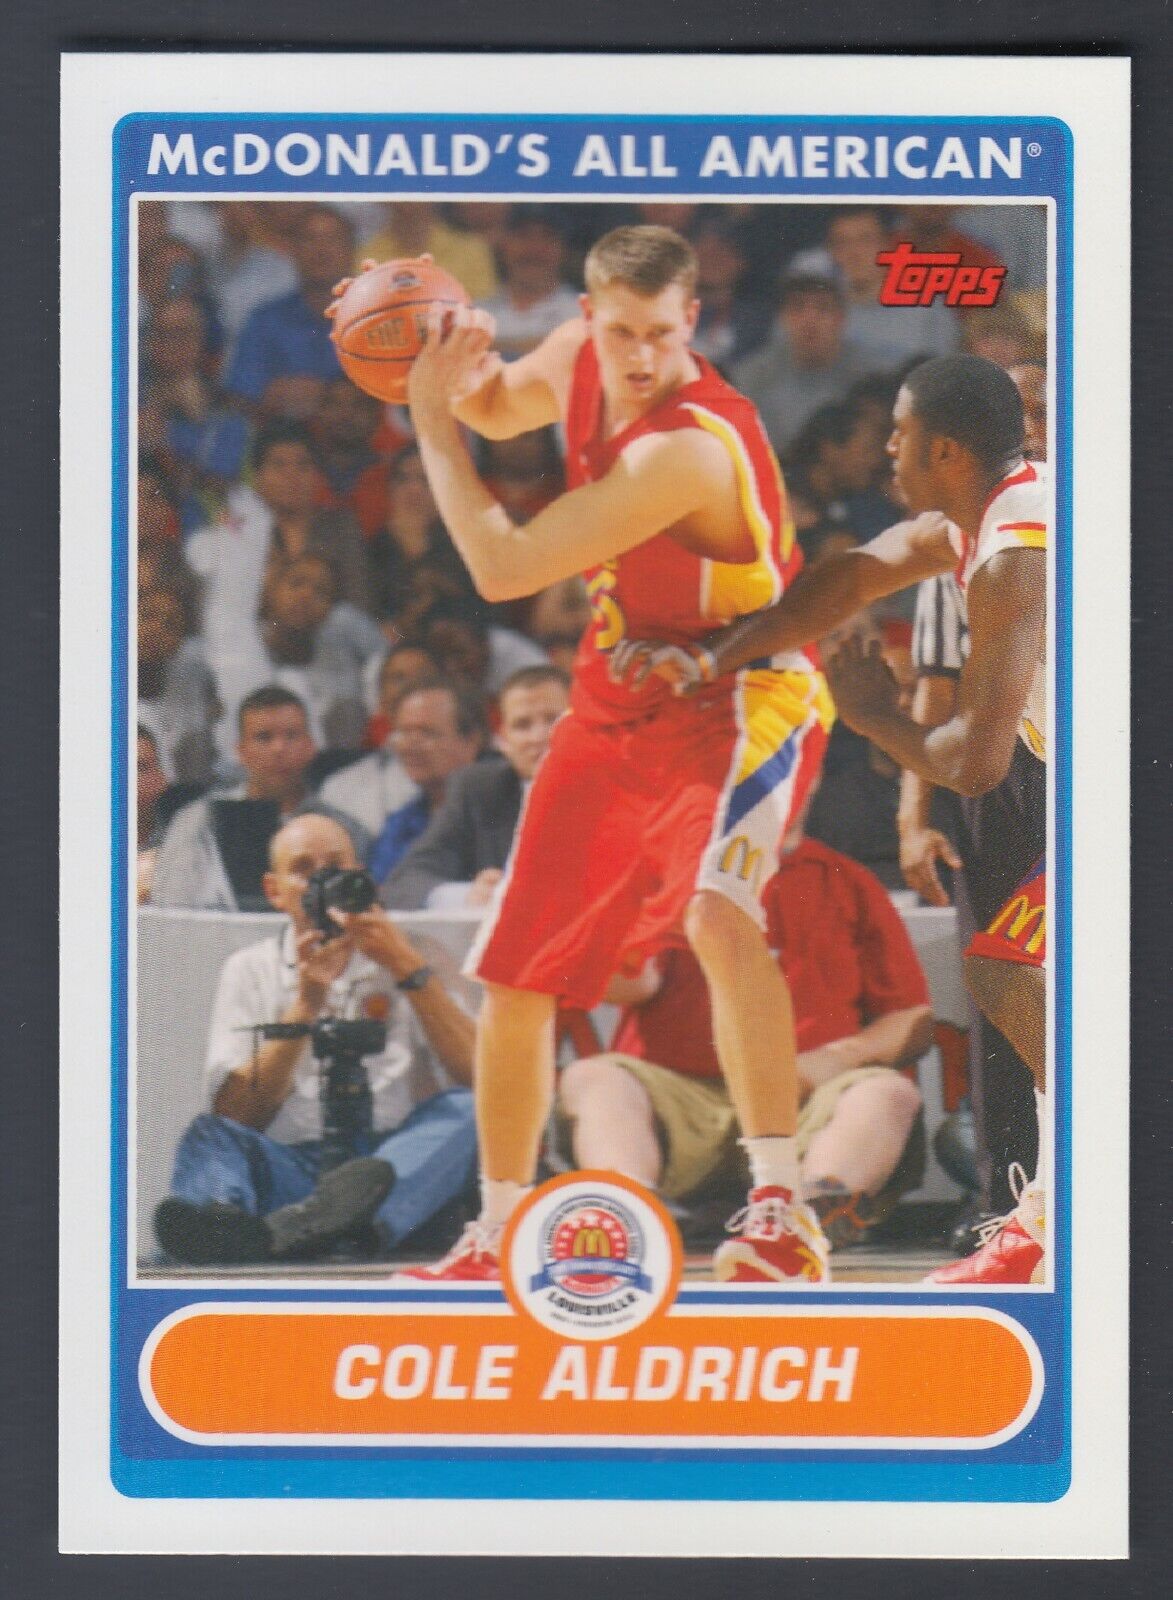 2007 TOPPS MCDONALDS COLE ALDRICH TRUE ROOKIE MINT RARE 1ST CARD EVER MADE HTF!!. rookie card picture